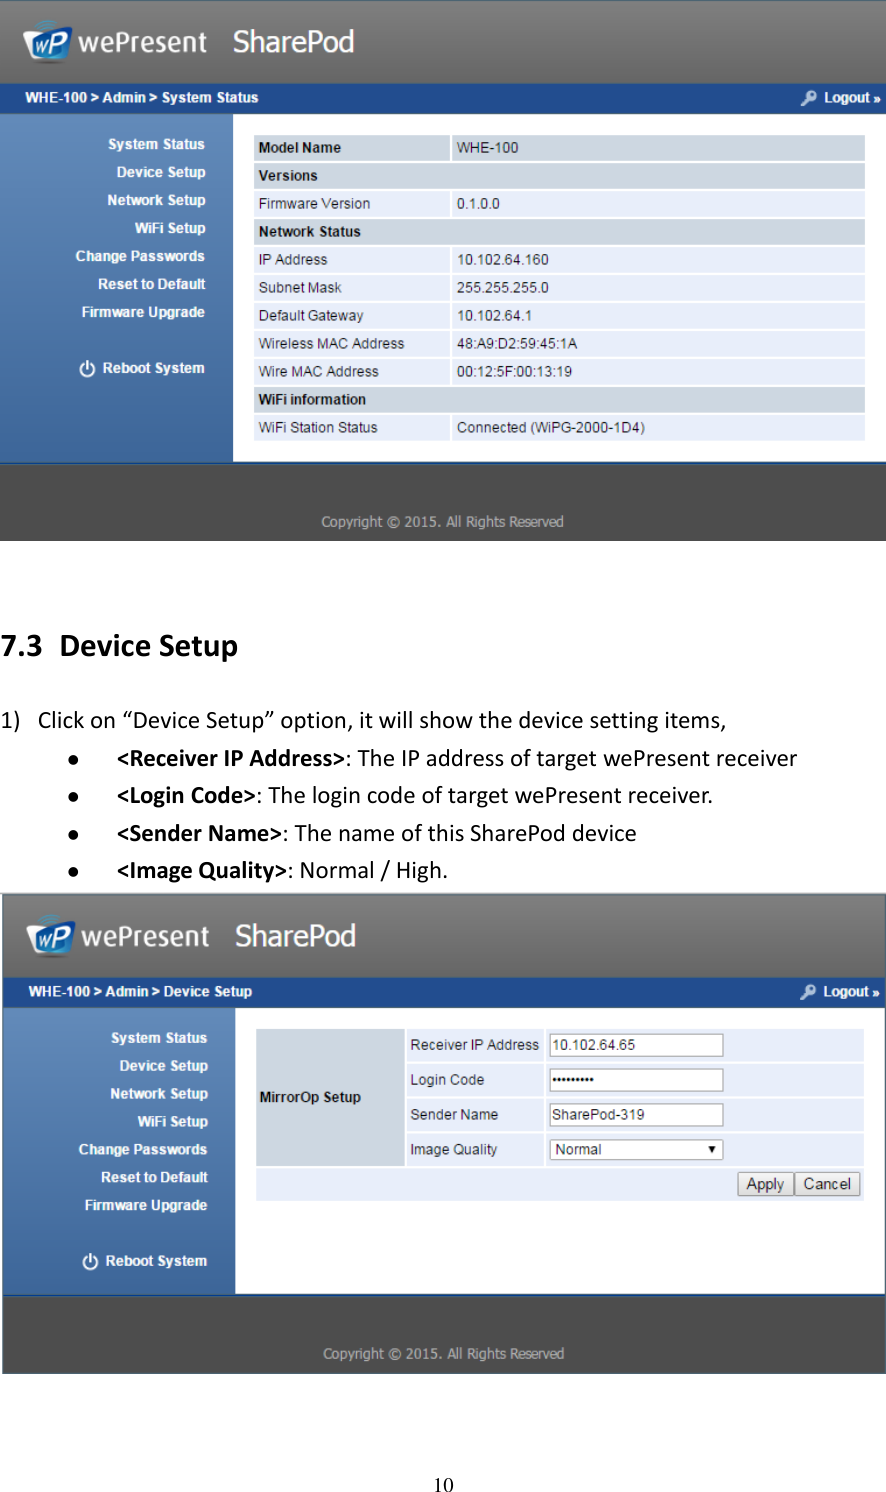   10   7.3 Device Setup 1) Click on “Device Setup” option, it will show the device setting items,  &lt;Receiver IP Address&gt;: The IP address of target wePresent receiver  &lt;Login Code&gt;: The login code of target wePresent receiver.    &lt;Sender Name&gt;: The name of this SharePod device  &lt;Image Quality&gt;: Normal / High.    